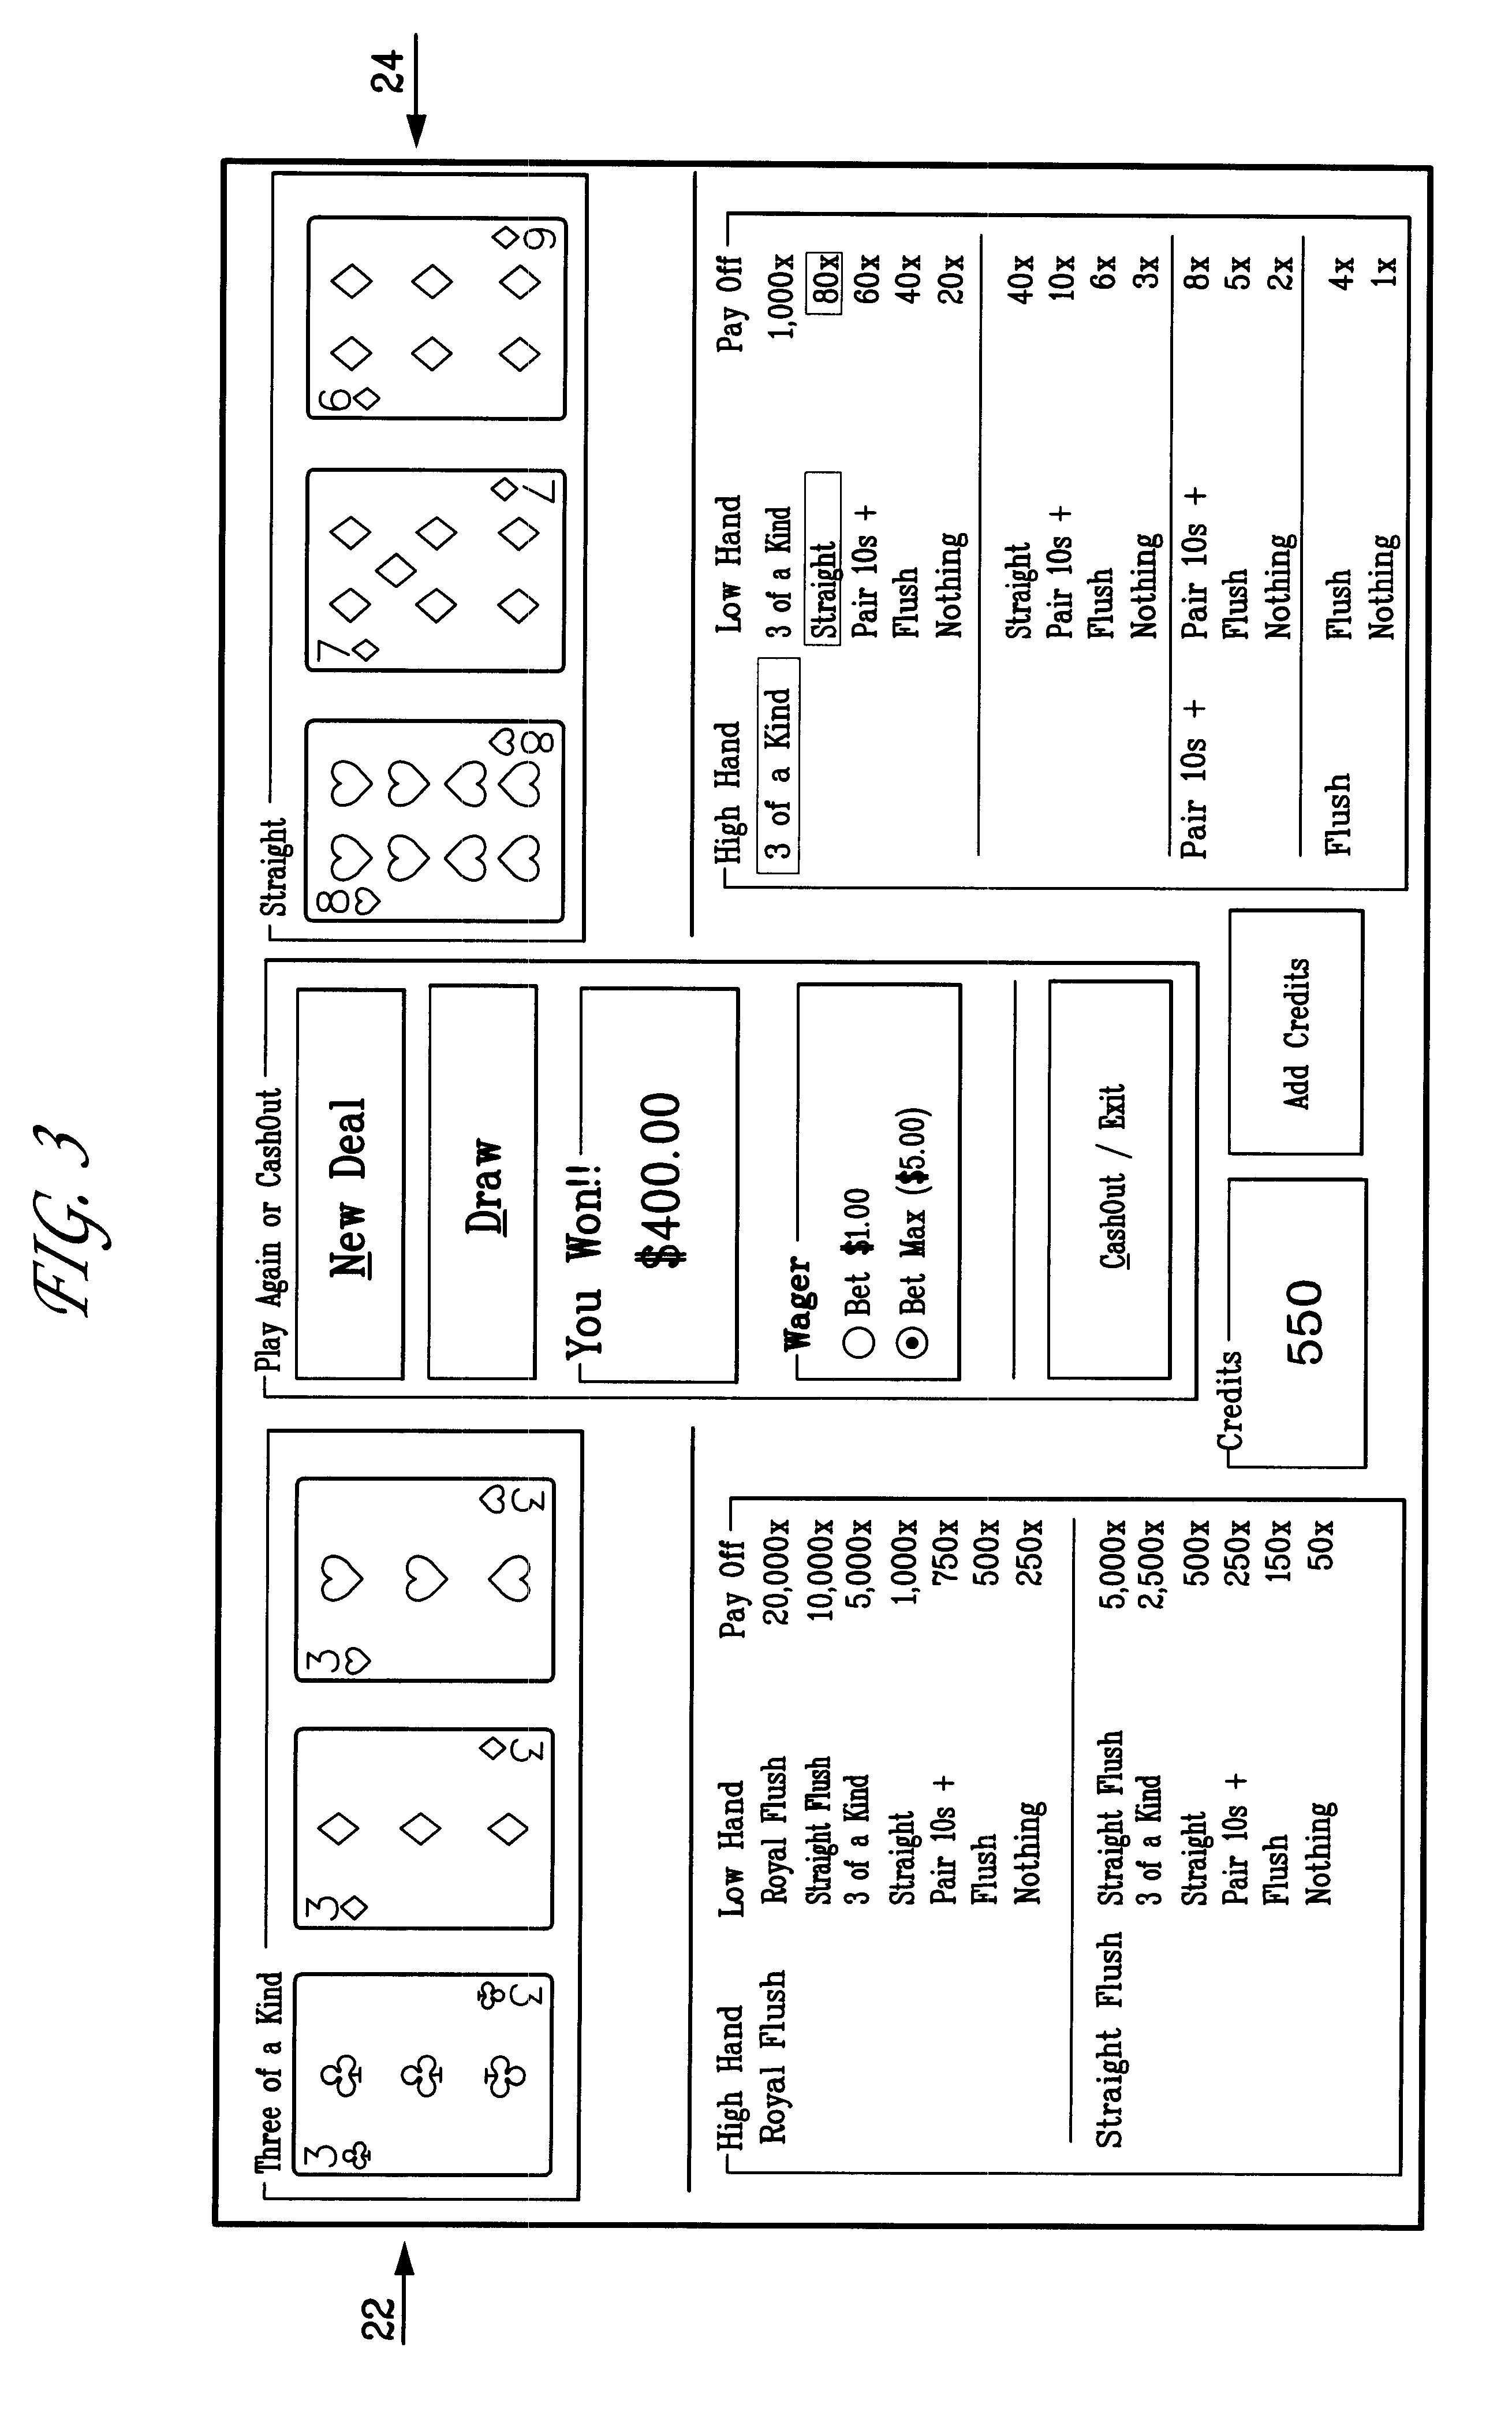 Method of playing a video poker game with a multiple winning hand parlay wagering option